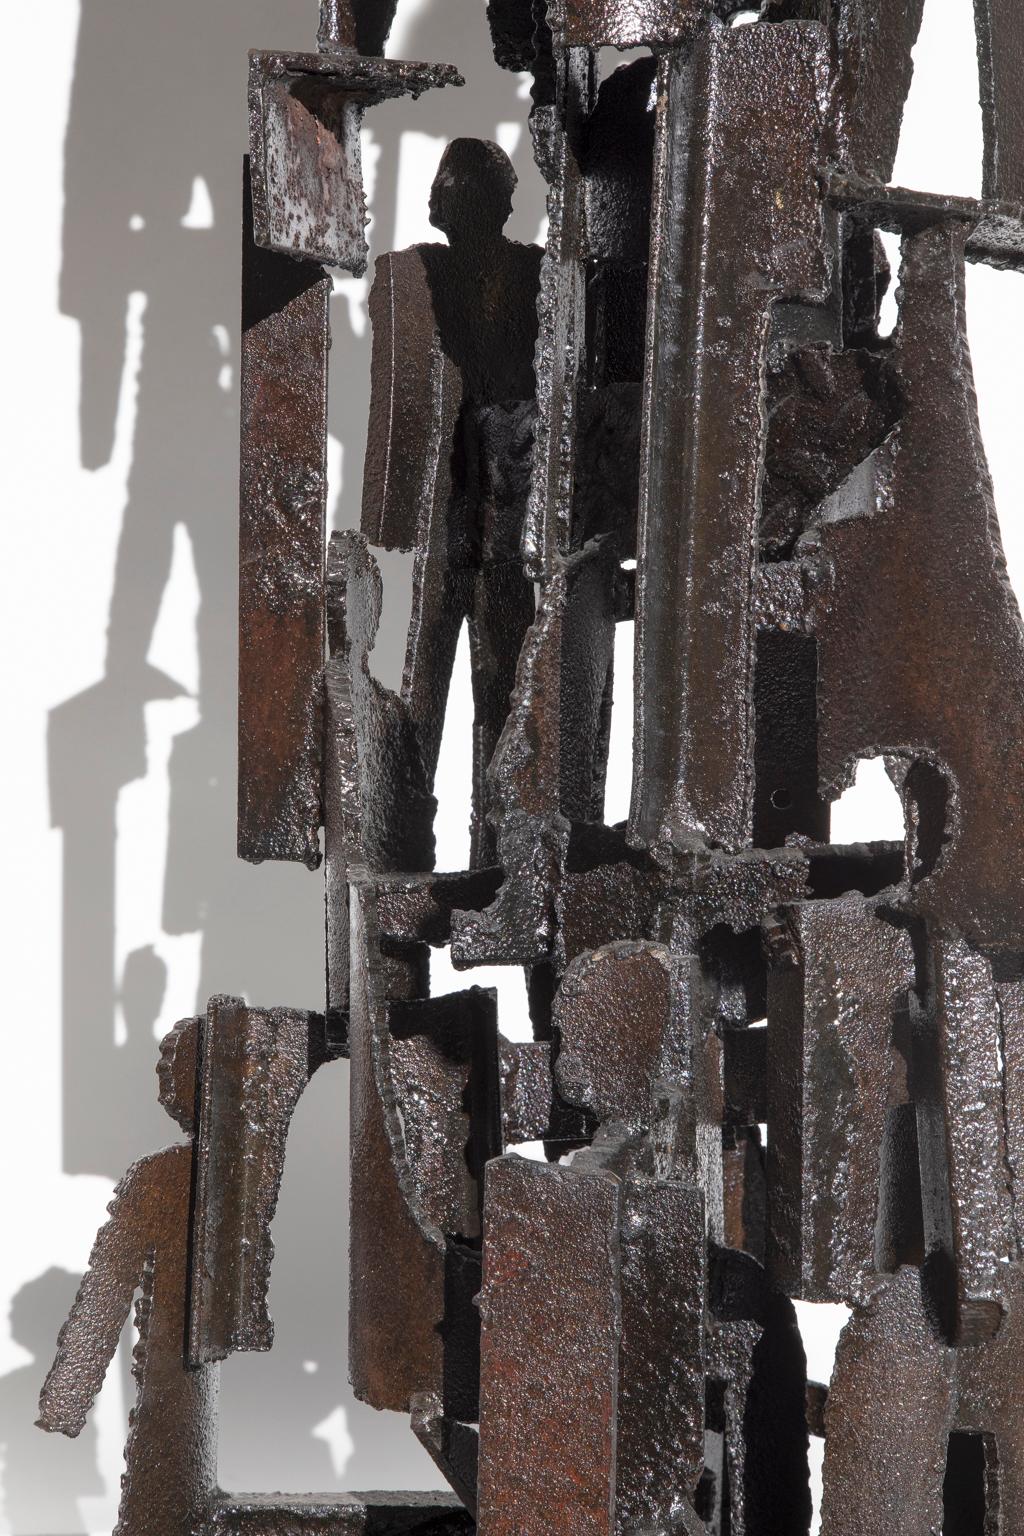 UNTITLED, Abstract/Figurative, Black Welded Steel, Cass Corridor Artist, Detroit For Sale 1